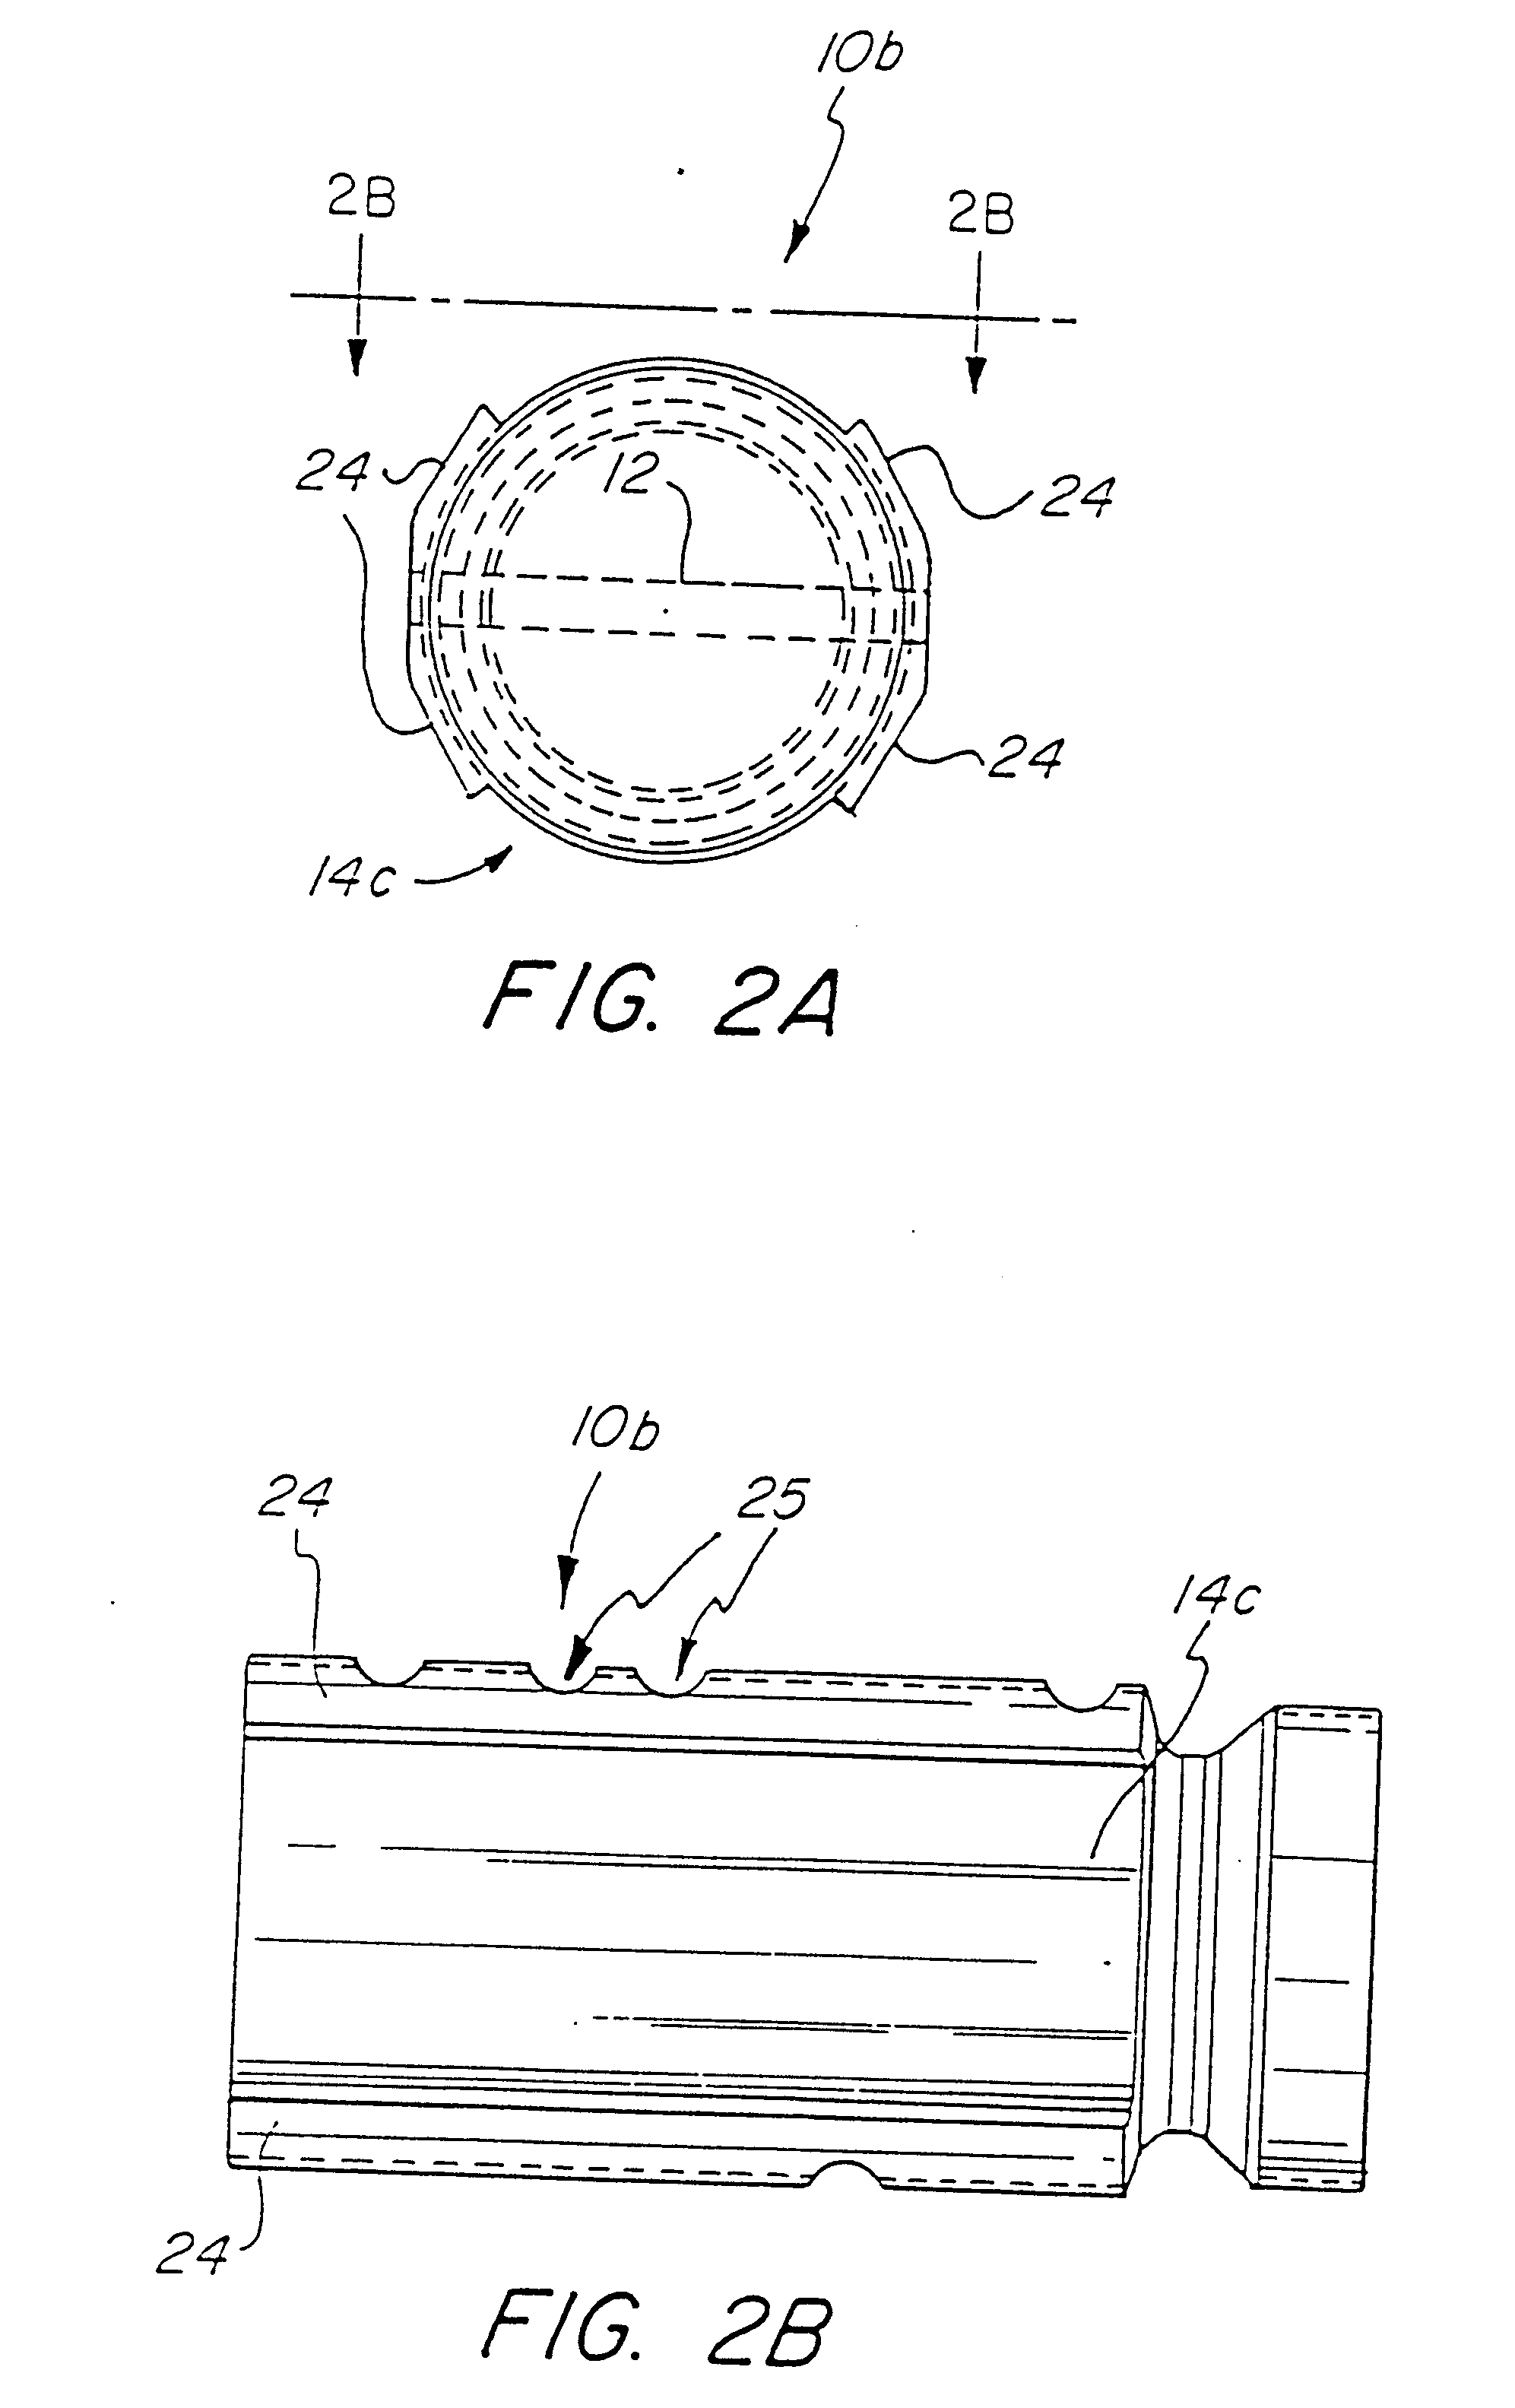 Shock-resistant electronic circuit assembly